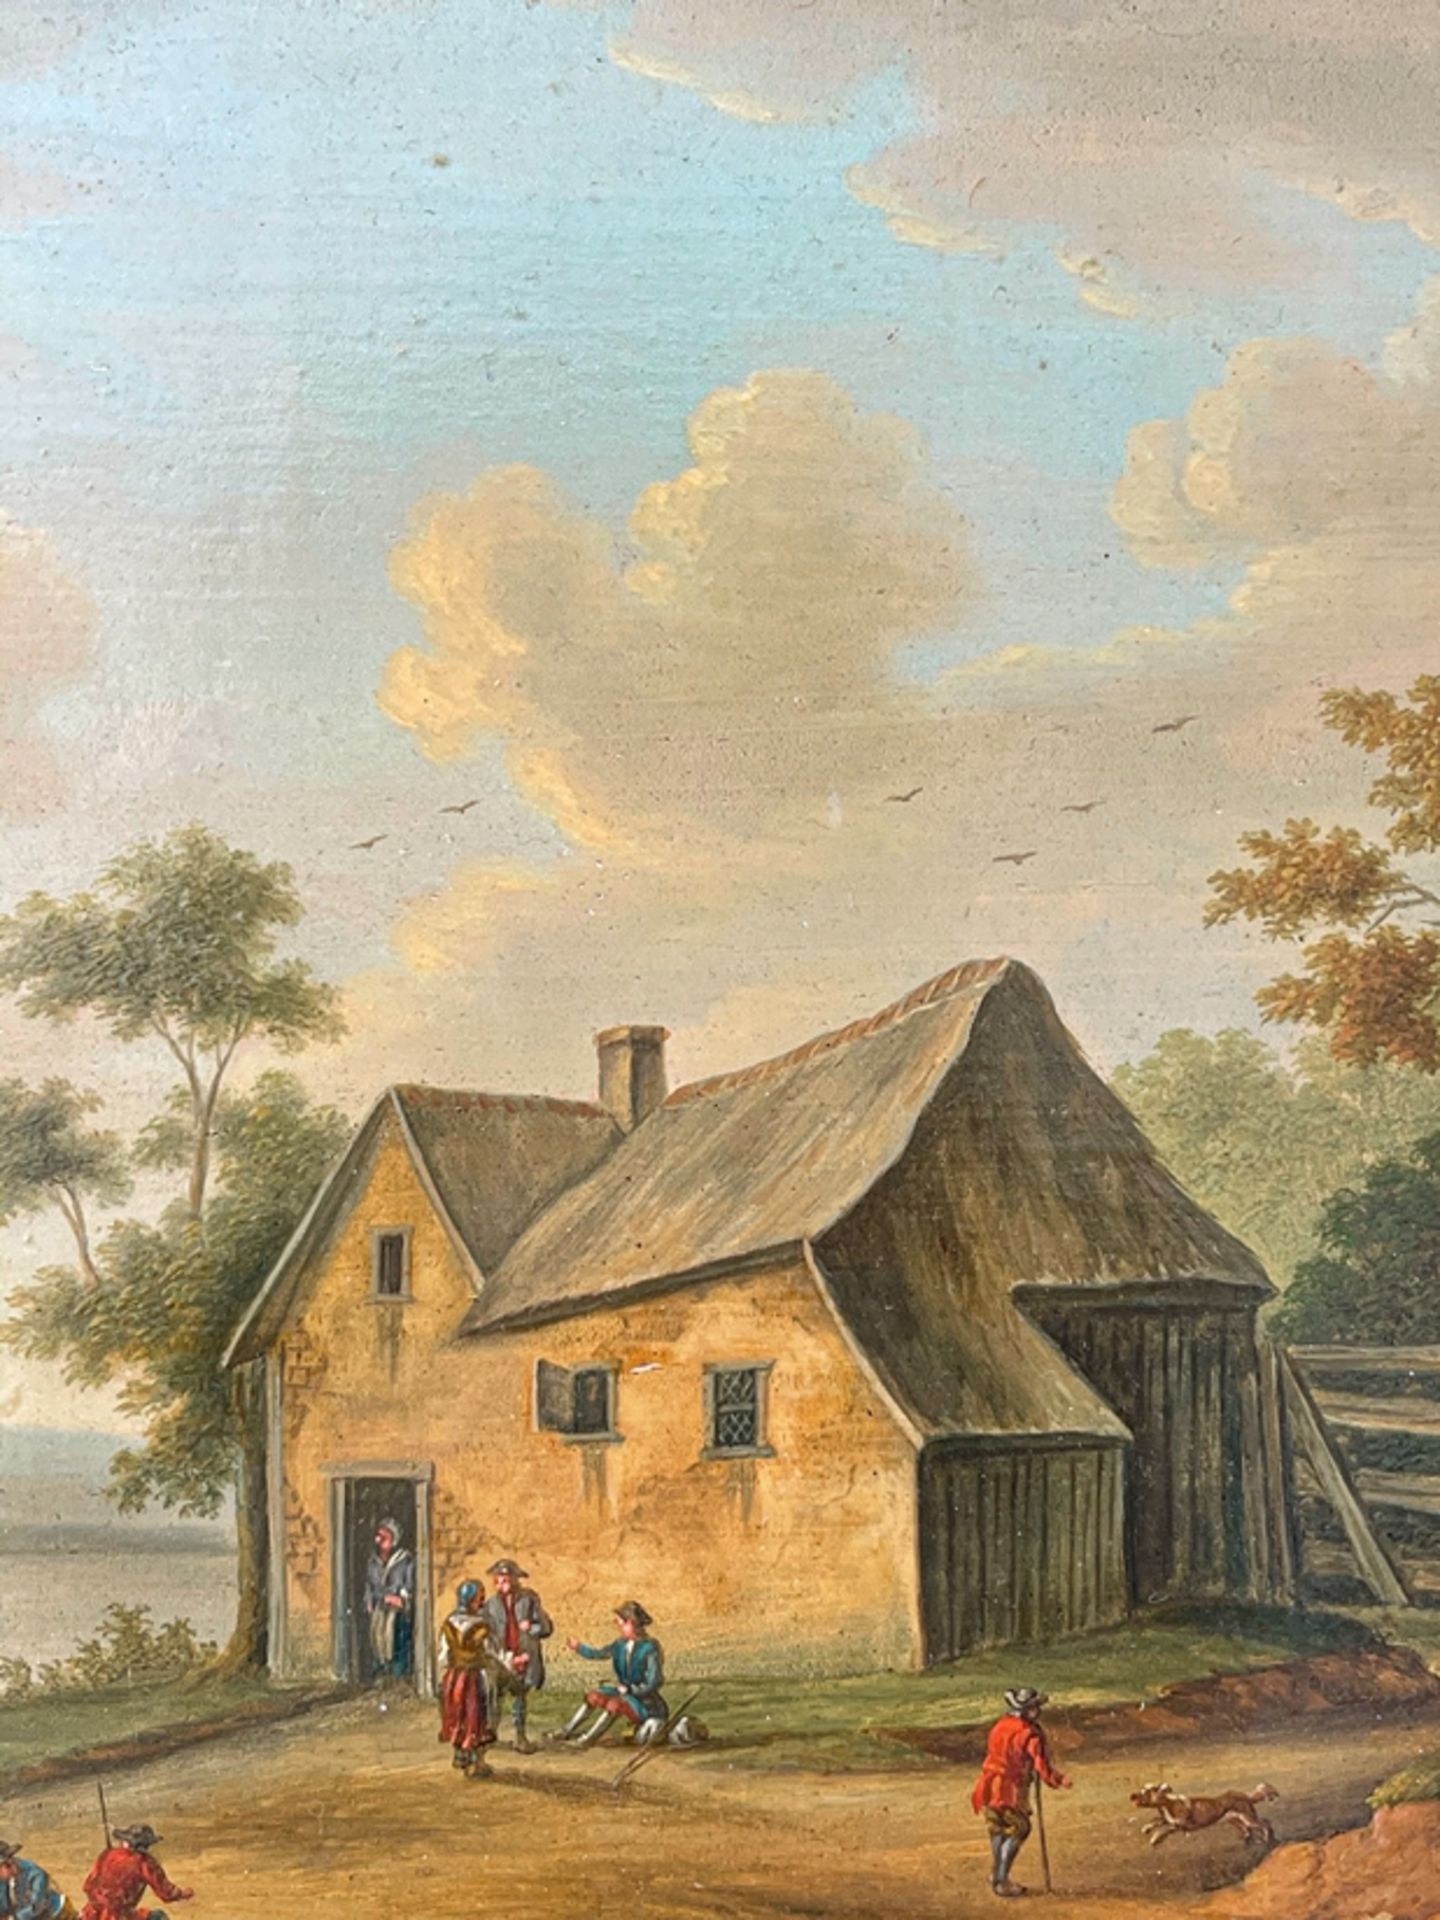 Landscape painting „house by the lake with people“ - Image 2 of 3